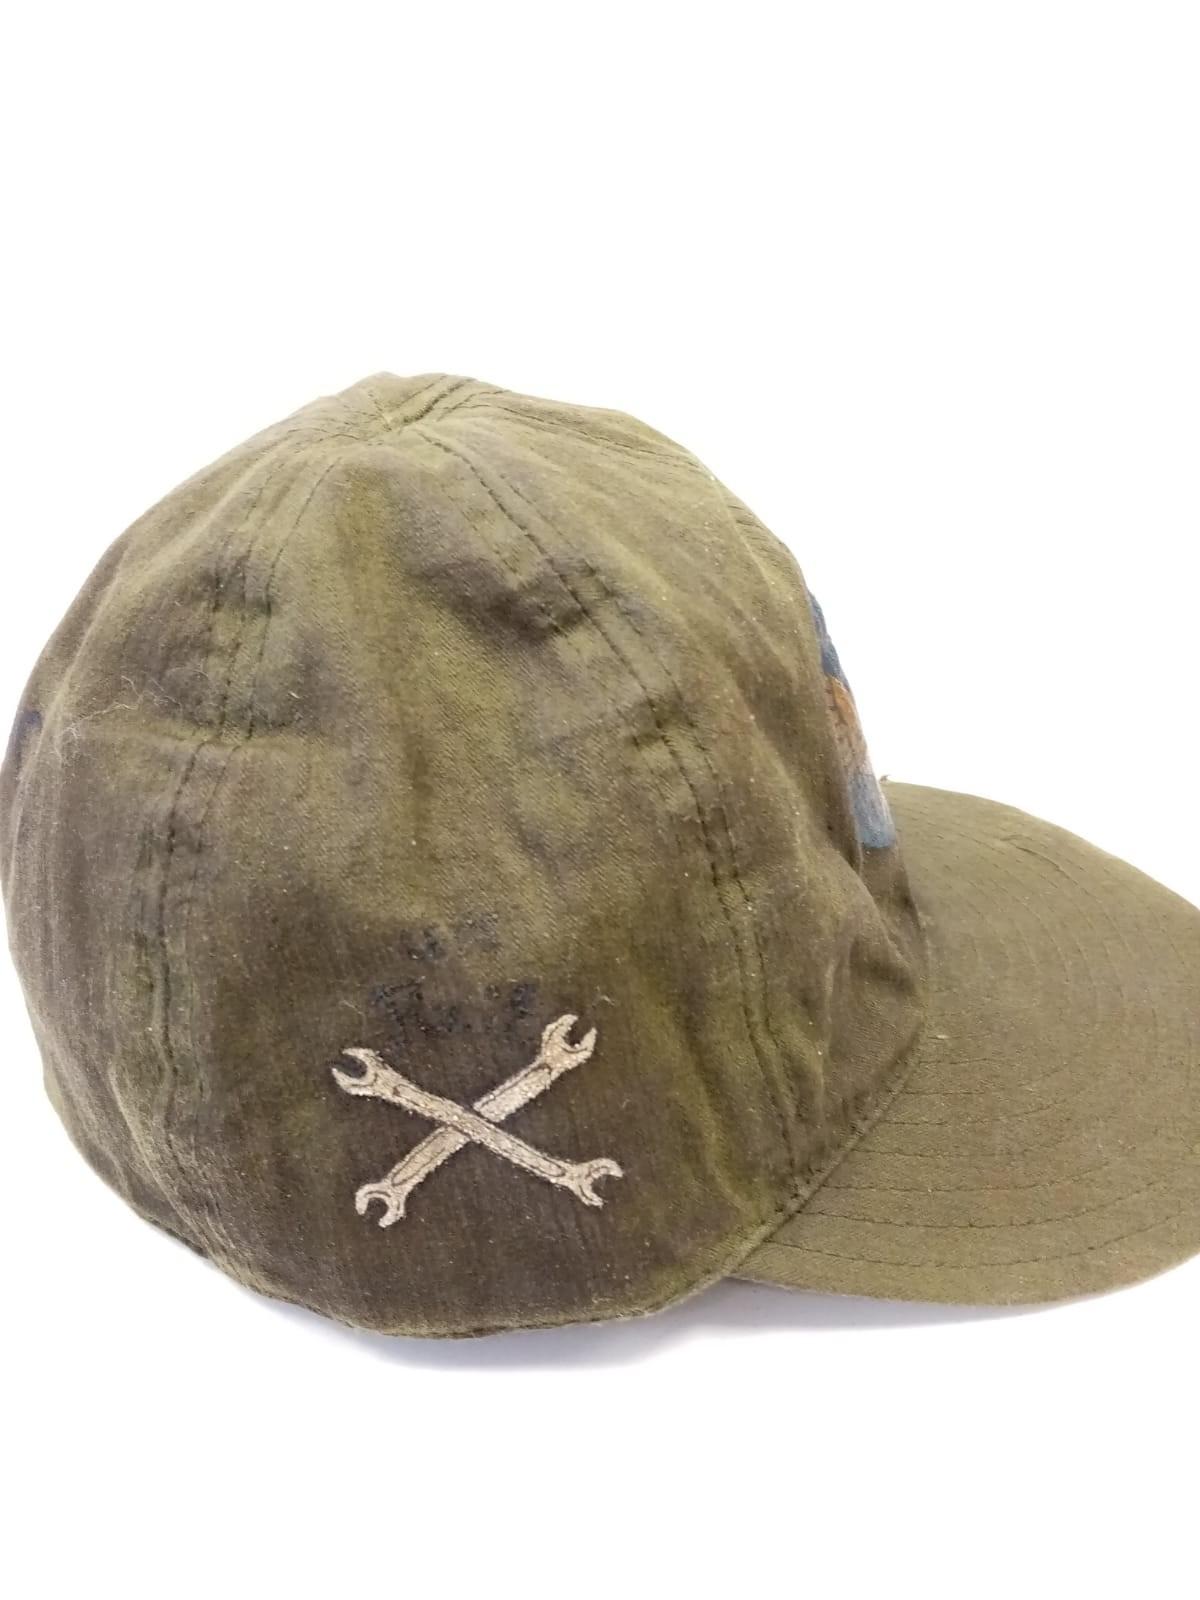 WW2 US Army Air Force mechanics cap with hand painted art - Image 4 of 5